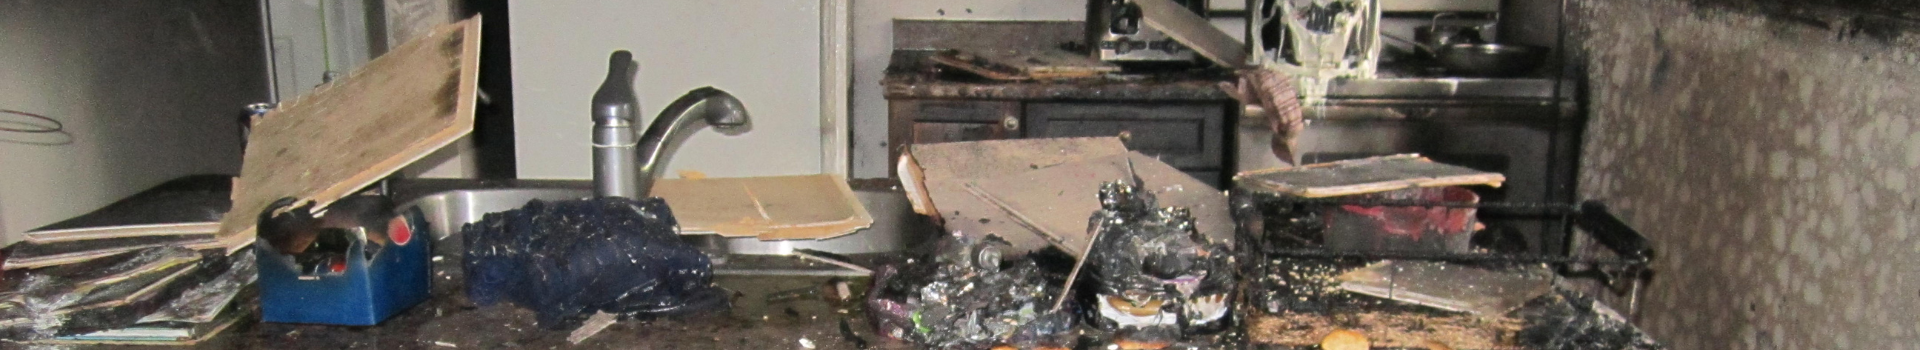 Kitchen destroyed by a fire